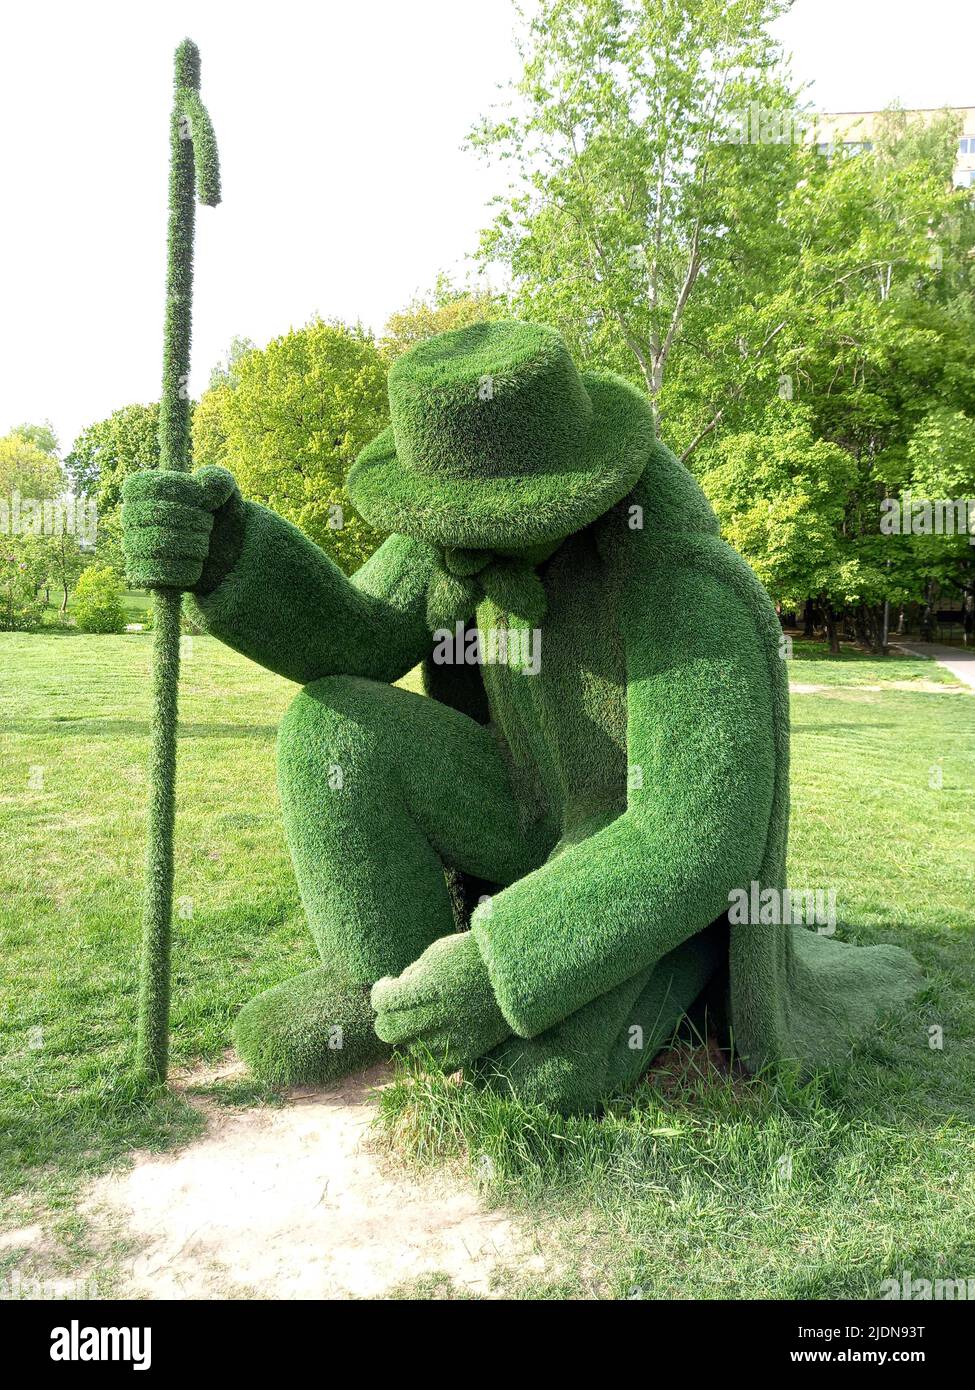 A feeble old man with a stick is trying to get up from the ground. Sculpture made of artificial grass in the city. The concept of helping and caring f Stock Photo